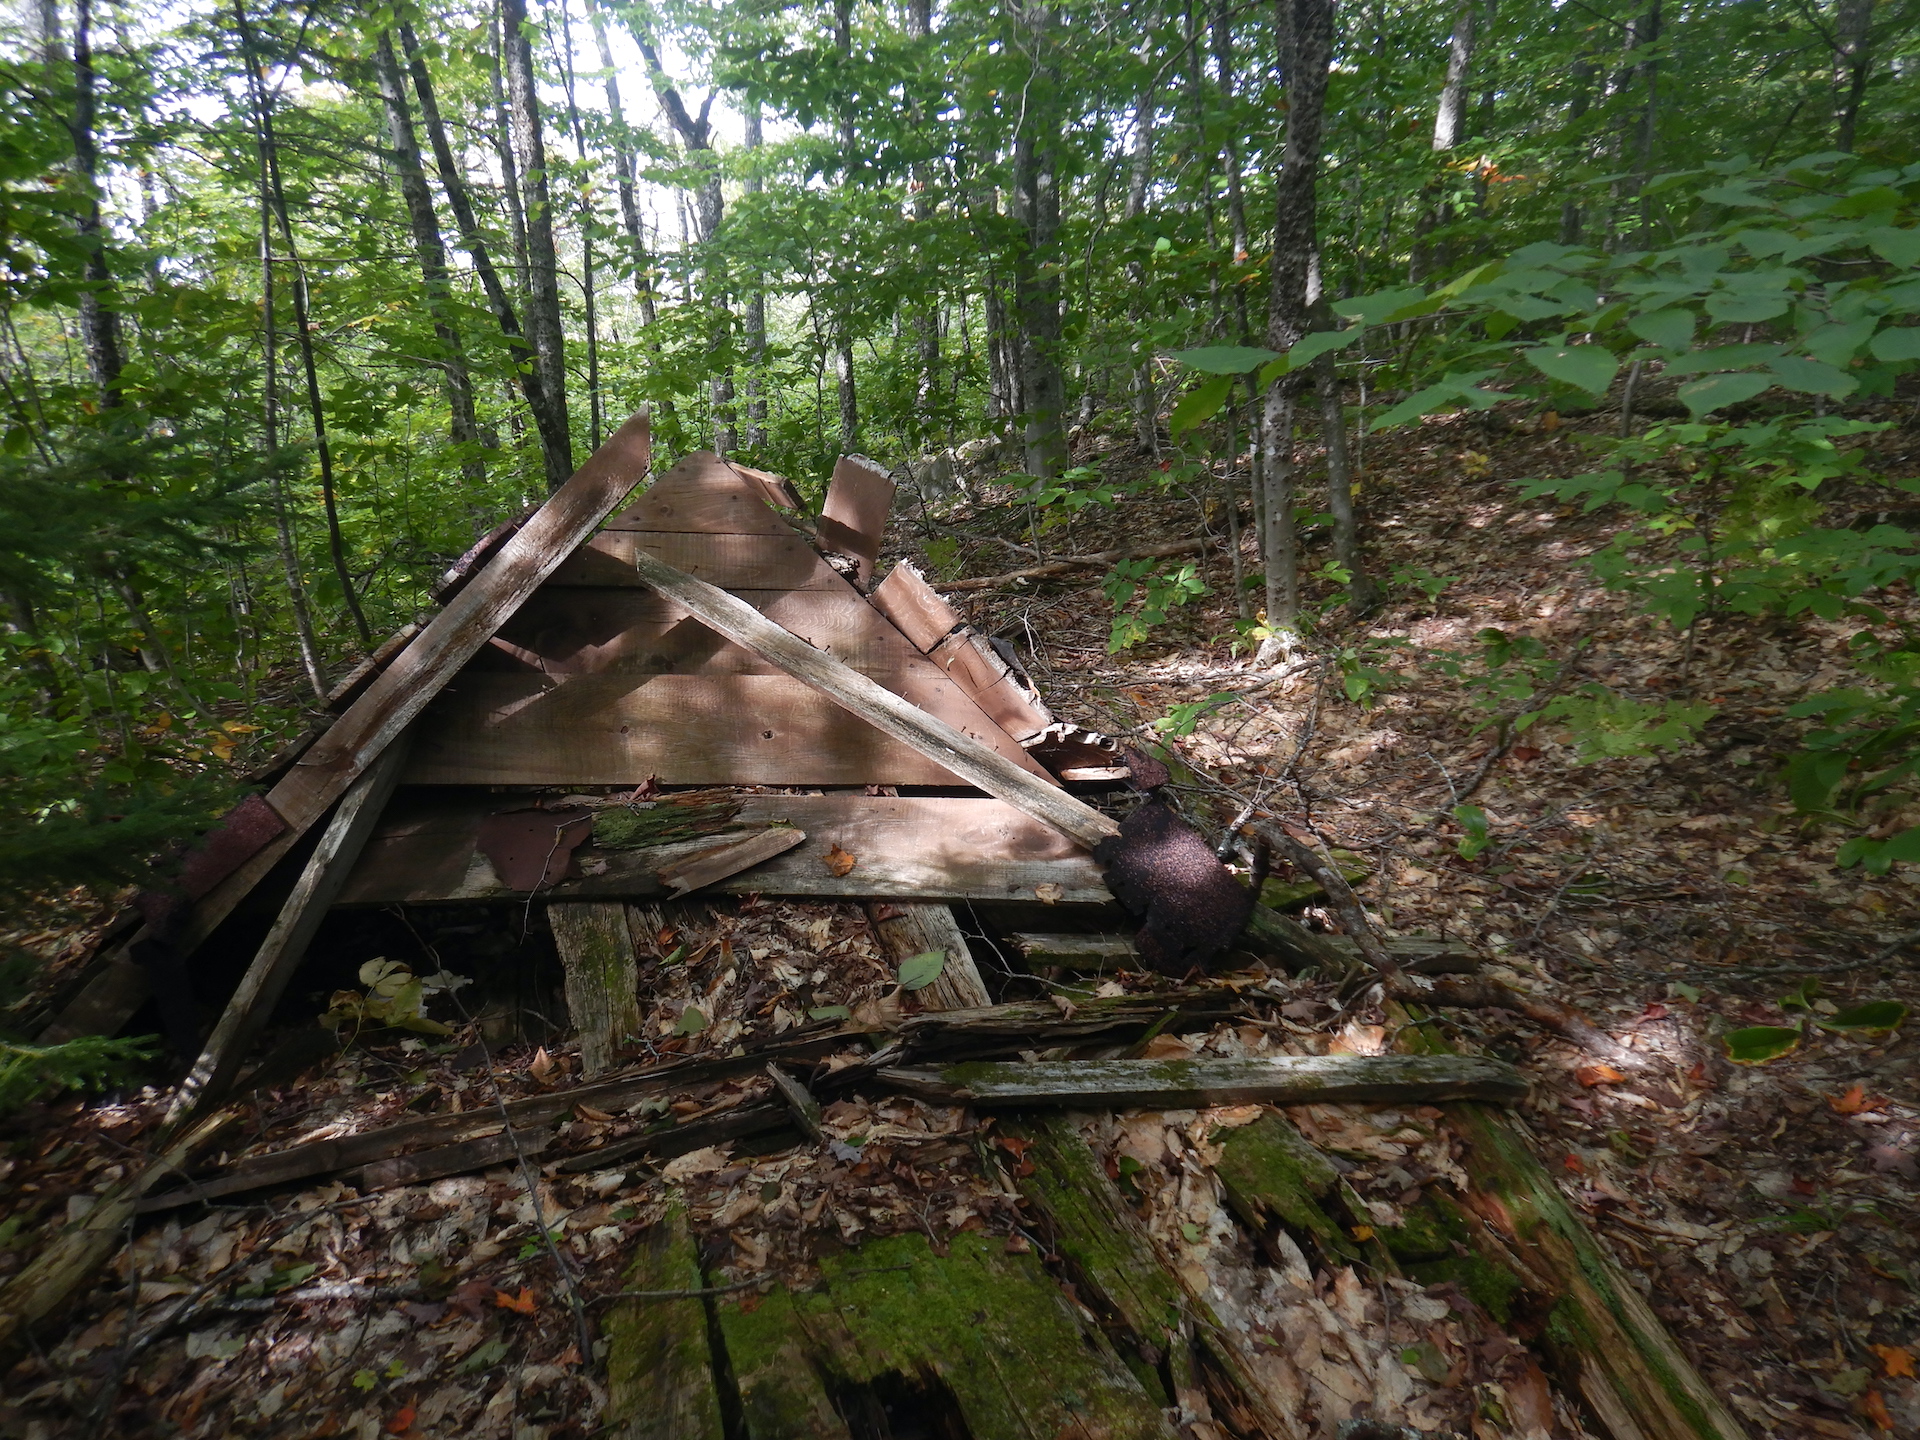 A collapsed cabin rests in the forest. Vegetation has yet to grow over the structure but the wood at the base in the foreground is rotted and moss covered. The rest of the structure forms a pyramid shape.